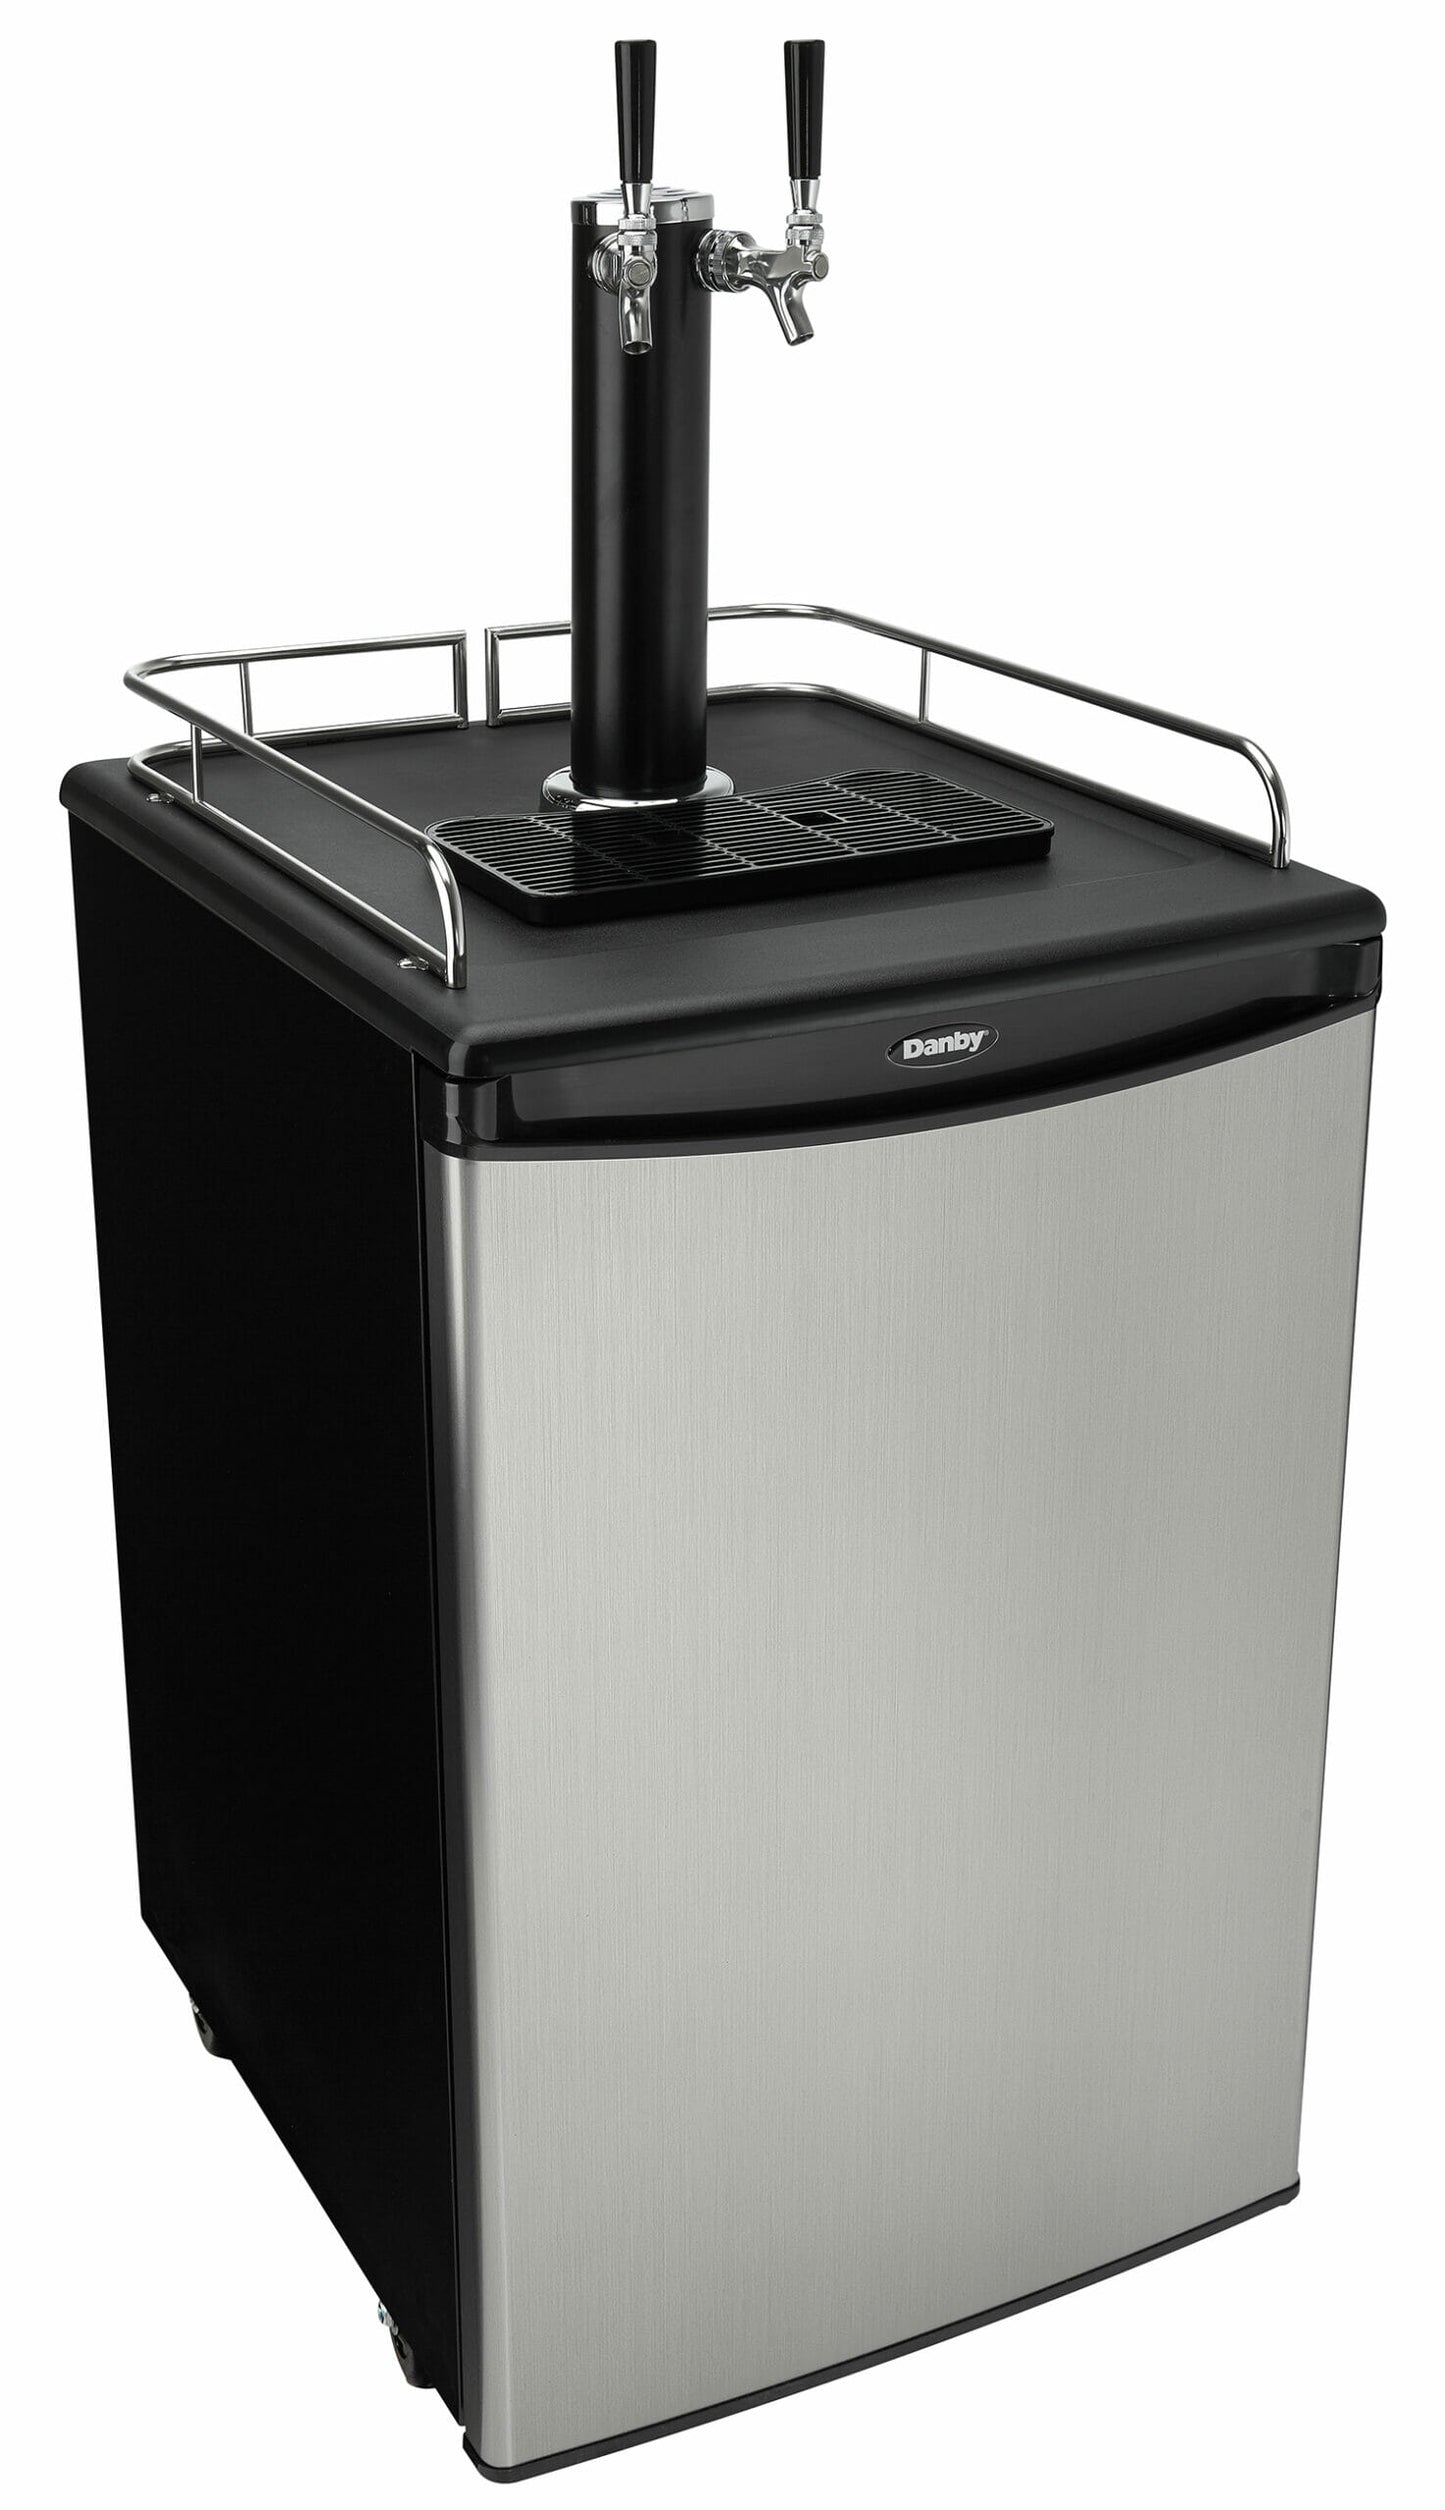 Danby 5.4 cu. ft. Dual-Tap Keg Cooler in Stainless Steel - DKC054A1BSL2DB